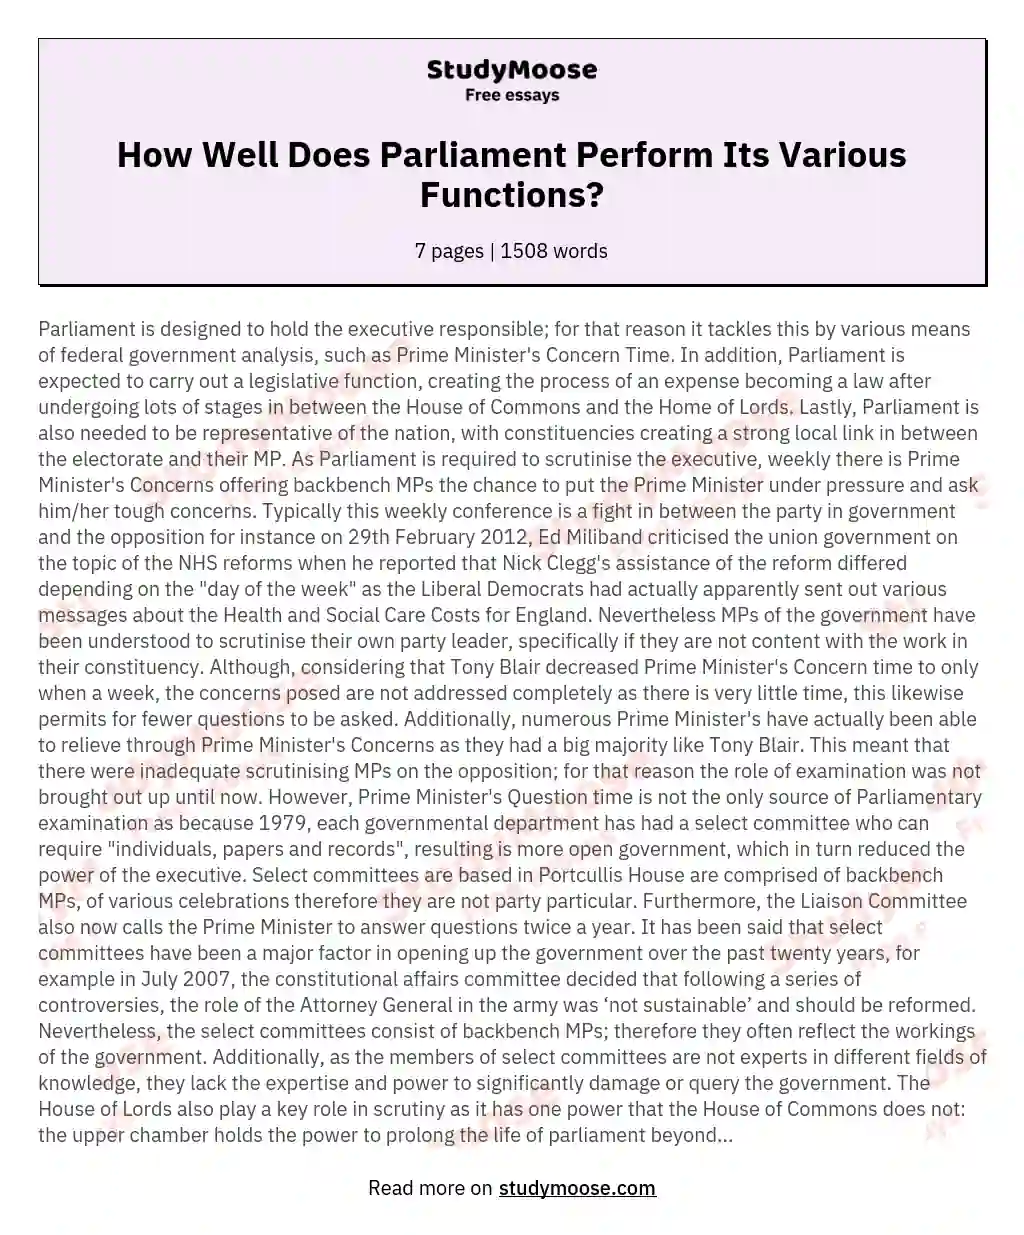 How Well Does Parliament Perform Its Various Functions? essay